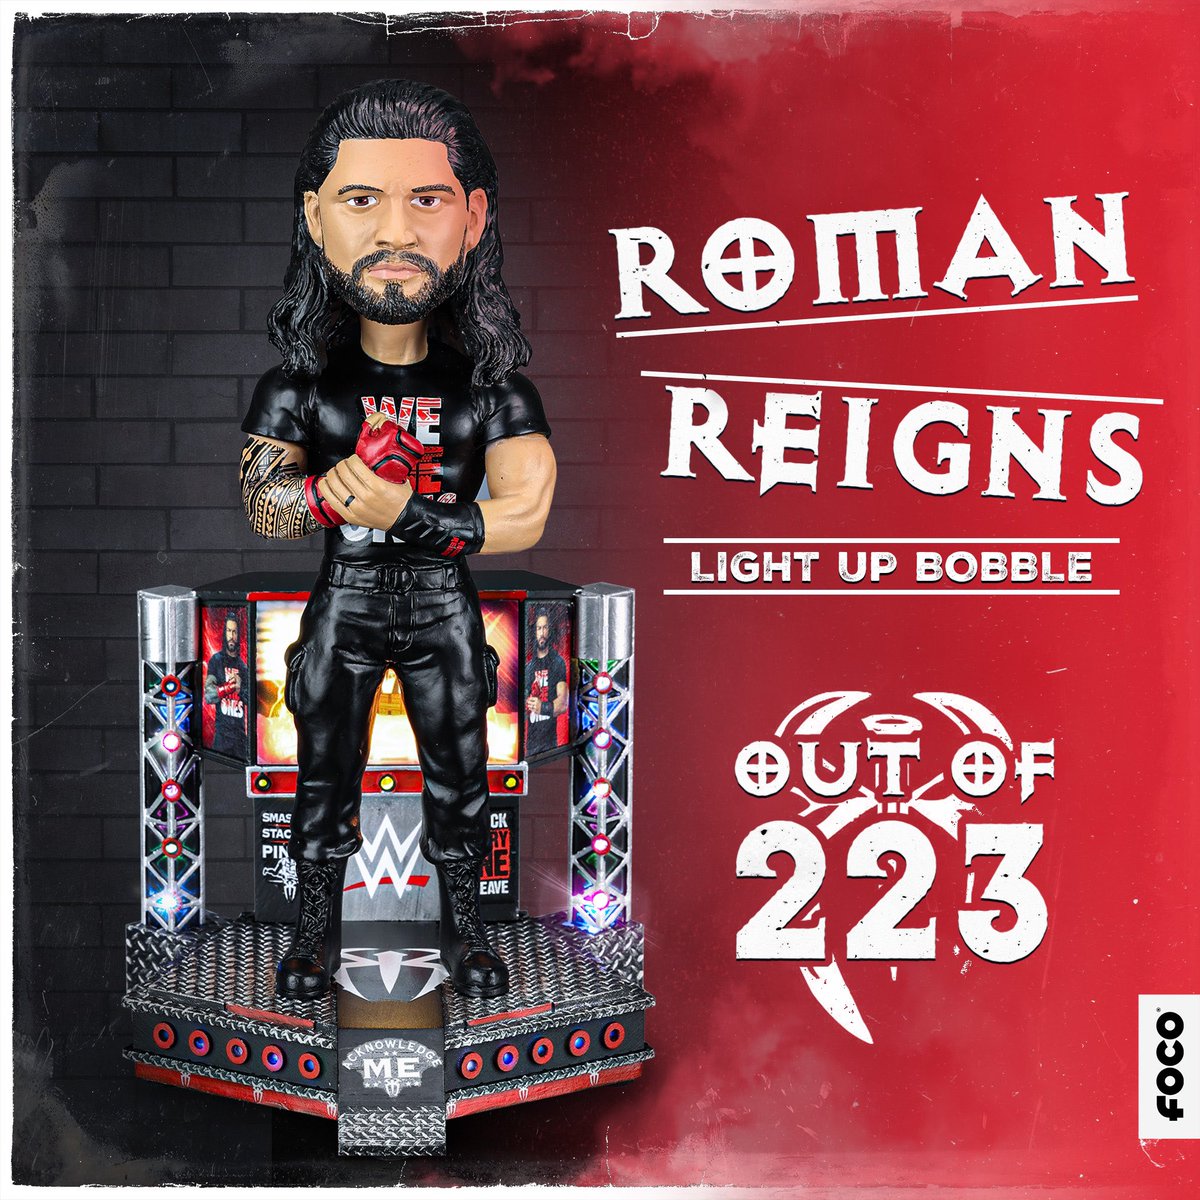 FOCO WWE ROMAN REIGNS BOBBLEHEAD GIVEAWAY: We are teaming up with FOCO to giveaway a Roman Reigns Light-Up Stage bobblehead to celebrate #WrestleMania 40! ☝️ To Enter: - Follow @FOCOusa - Follow @focobobbles - Follow @WrestleFigNews - ReTweet *Winner will be contacted 4/5*